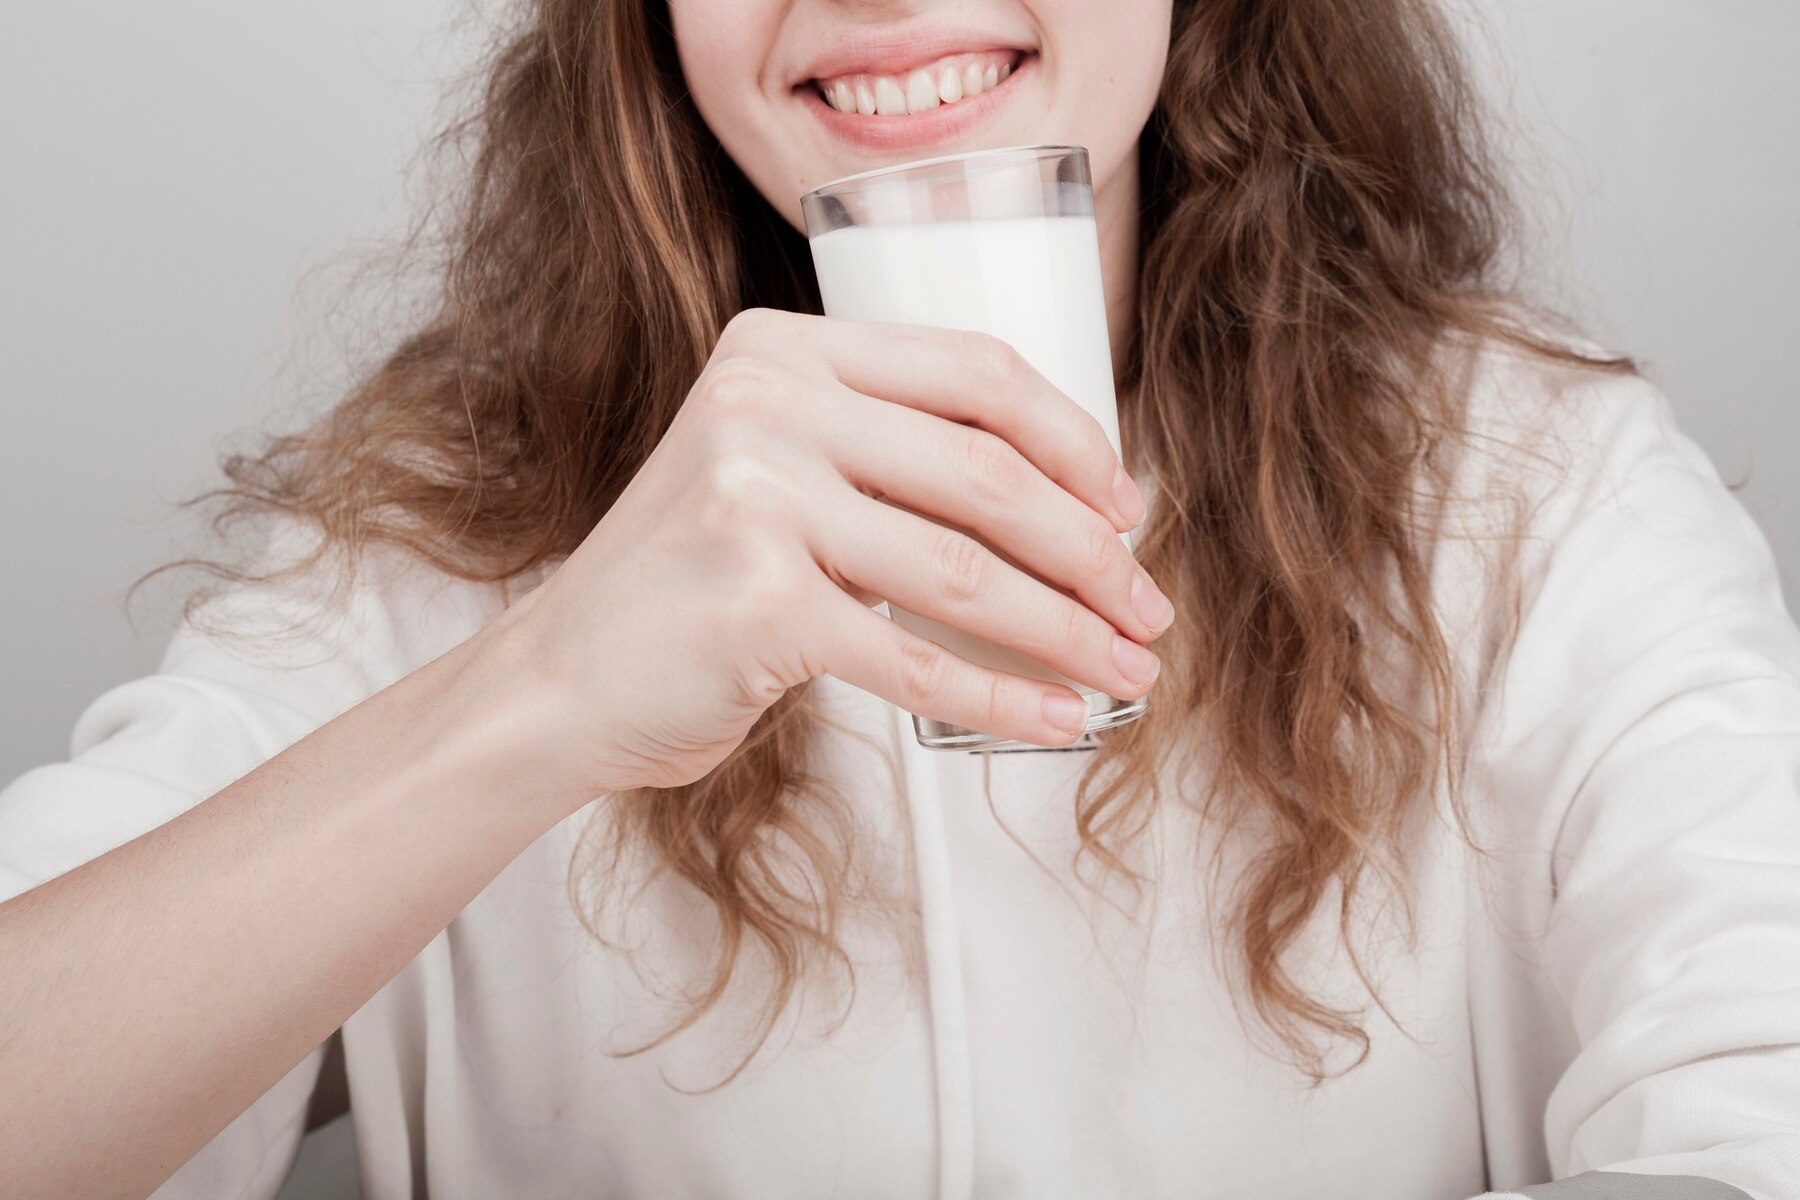 smiley-girl-wanting-to-drink-some-milk_23-2148399084.jpg